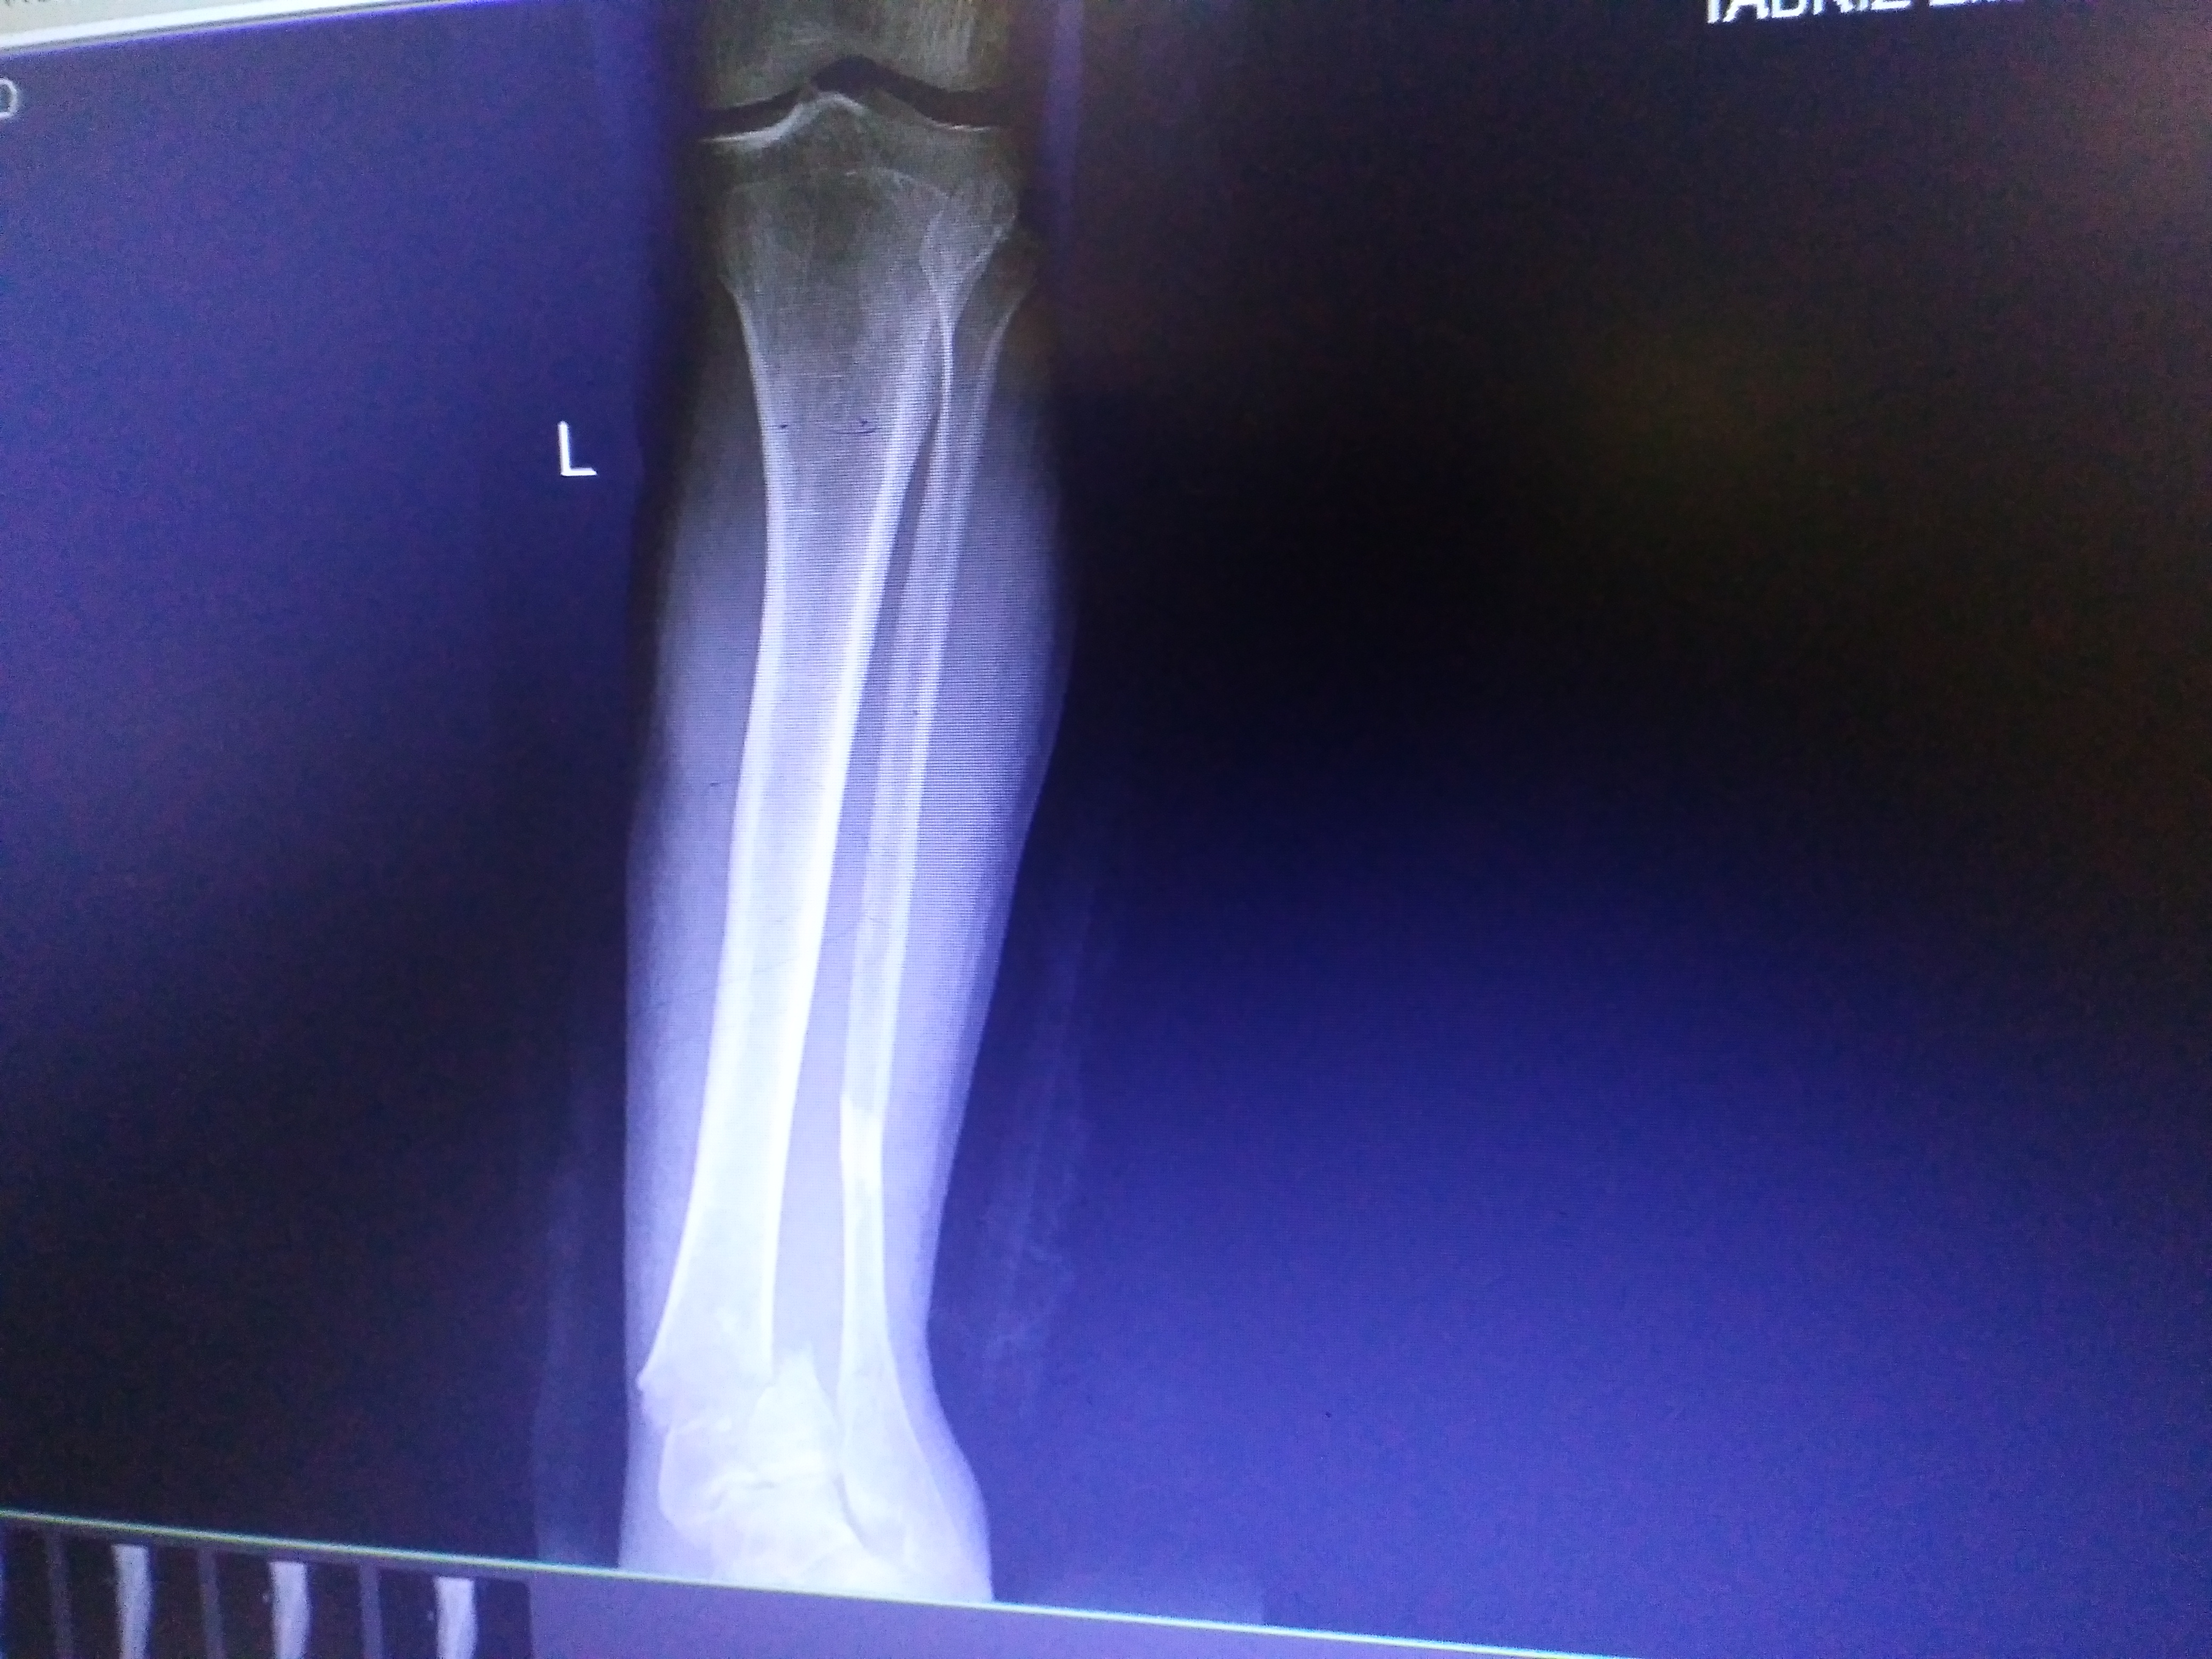 There is a comminuted distal tibial fracture extending into the tibial plafond.